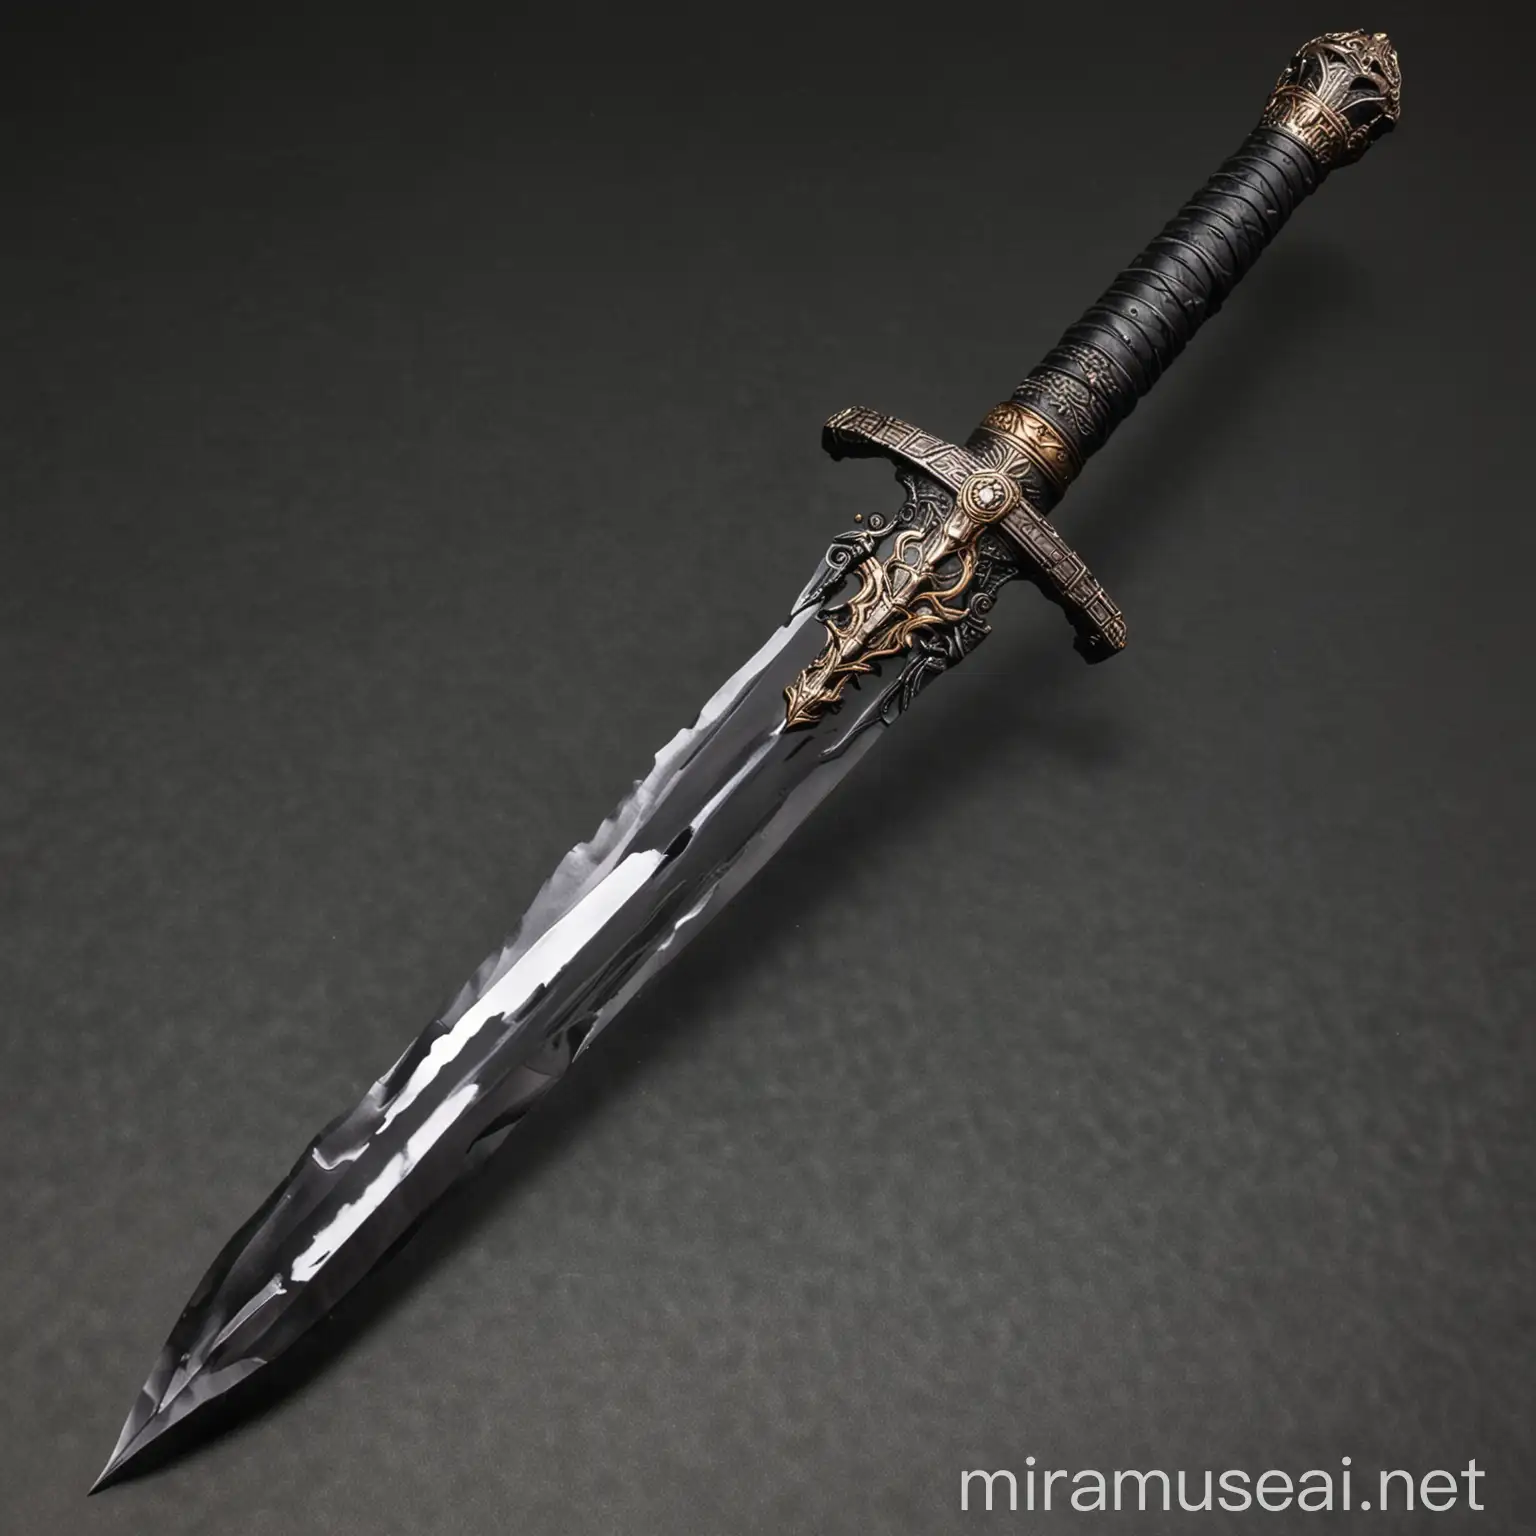 Elegant Black Panther Style Sword Displayed Against Intricate Background